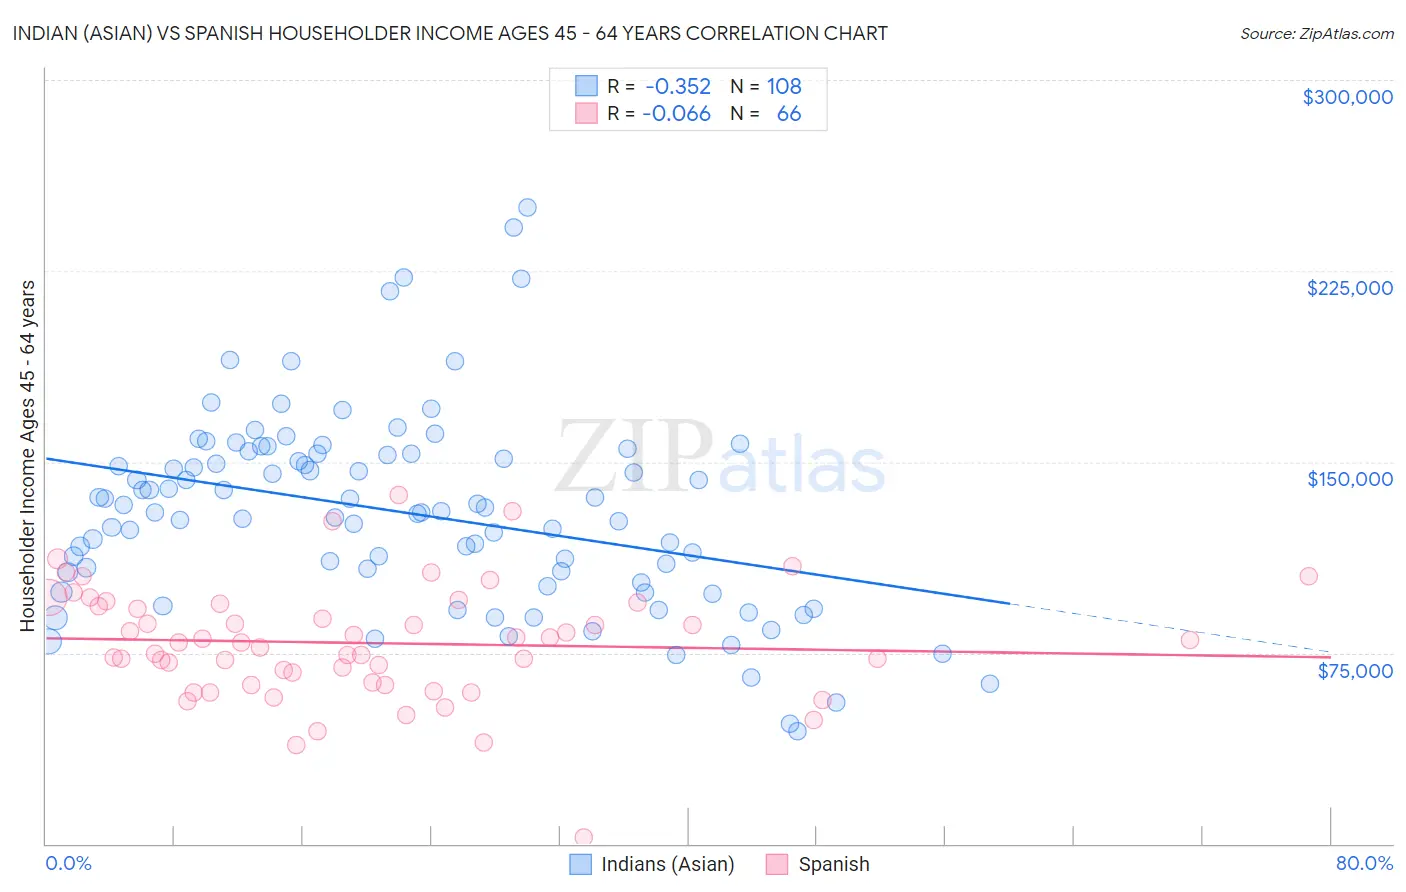 Indian (Asian) vs Spanish Householder Income Ages 45 - 64 years